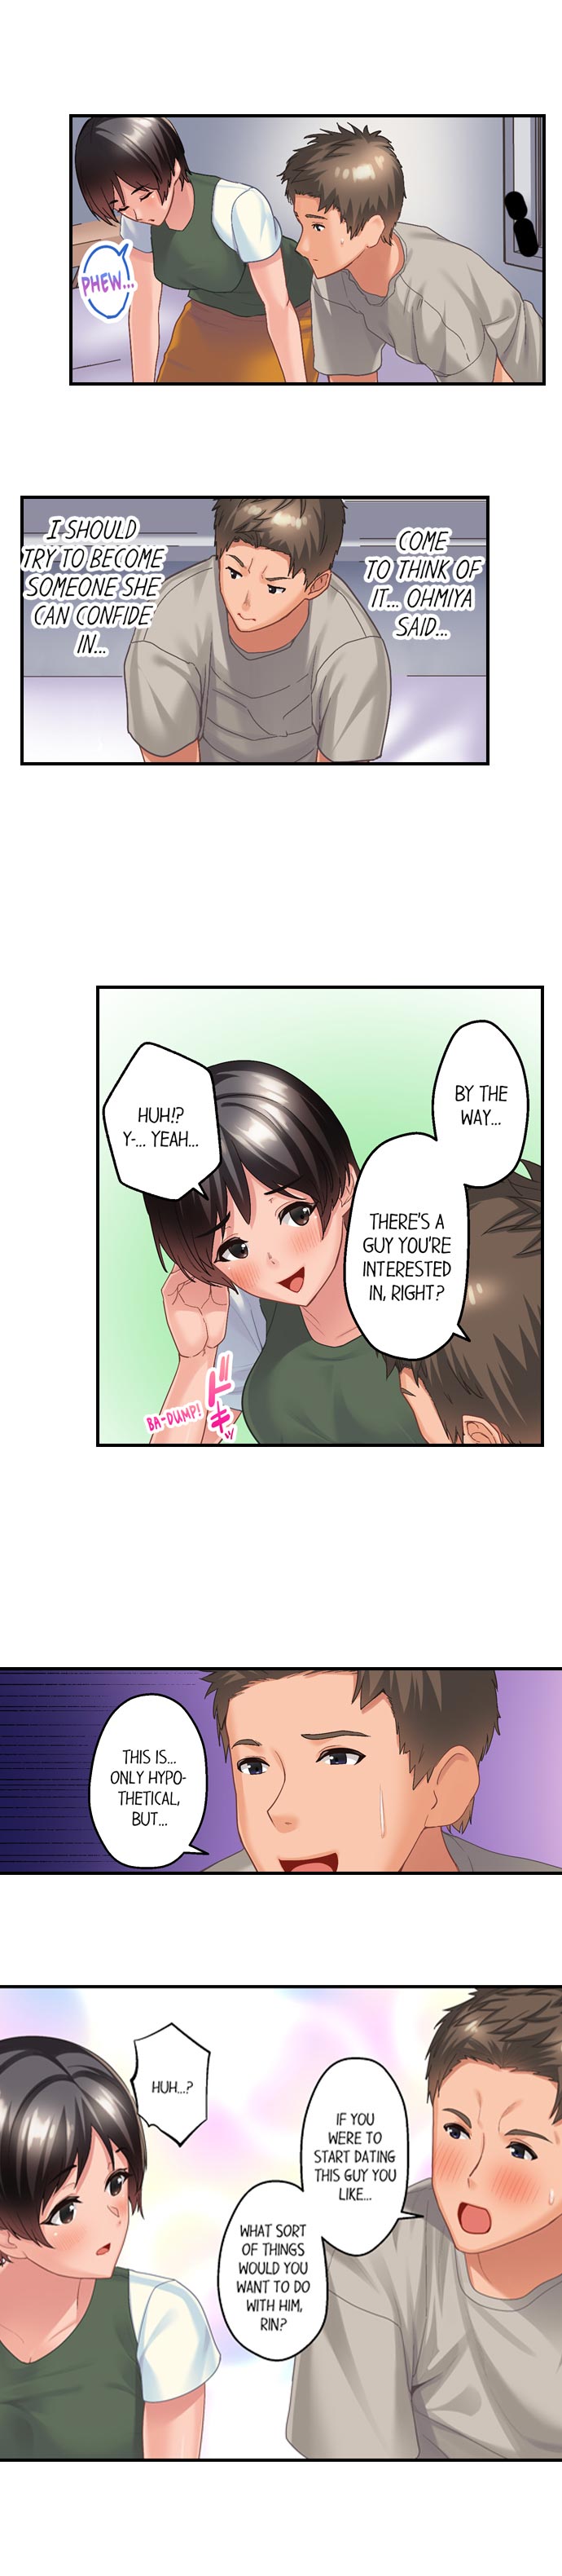 Using 100 Boxes of Condoms With My Childhood Friend! - Chapter 10 Page 7